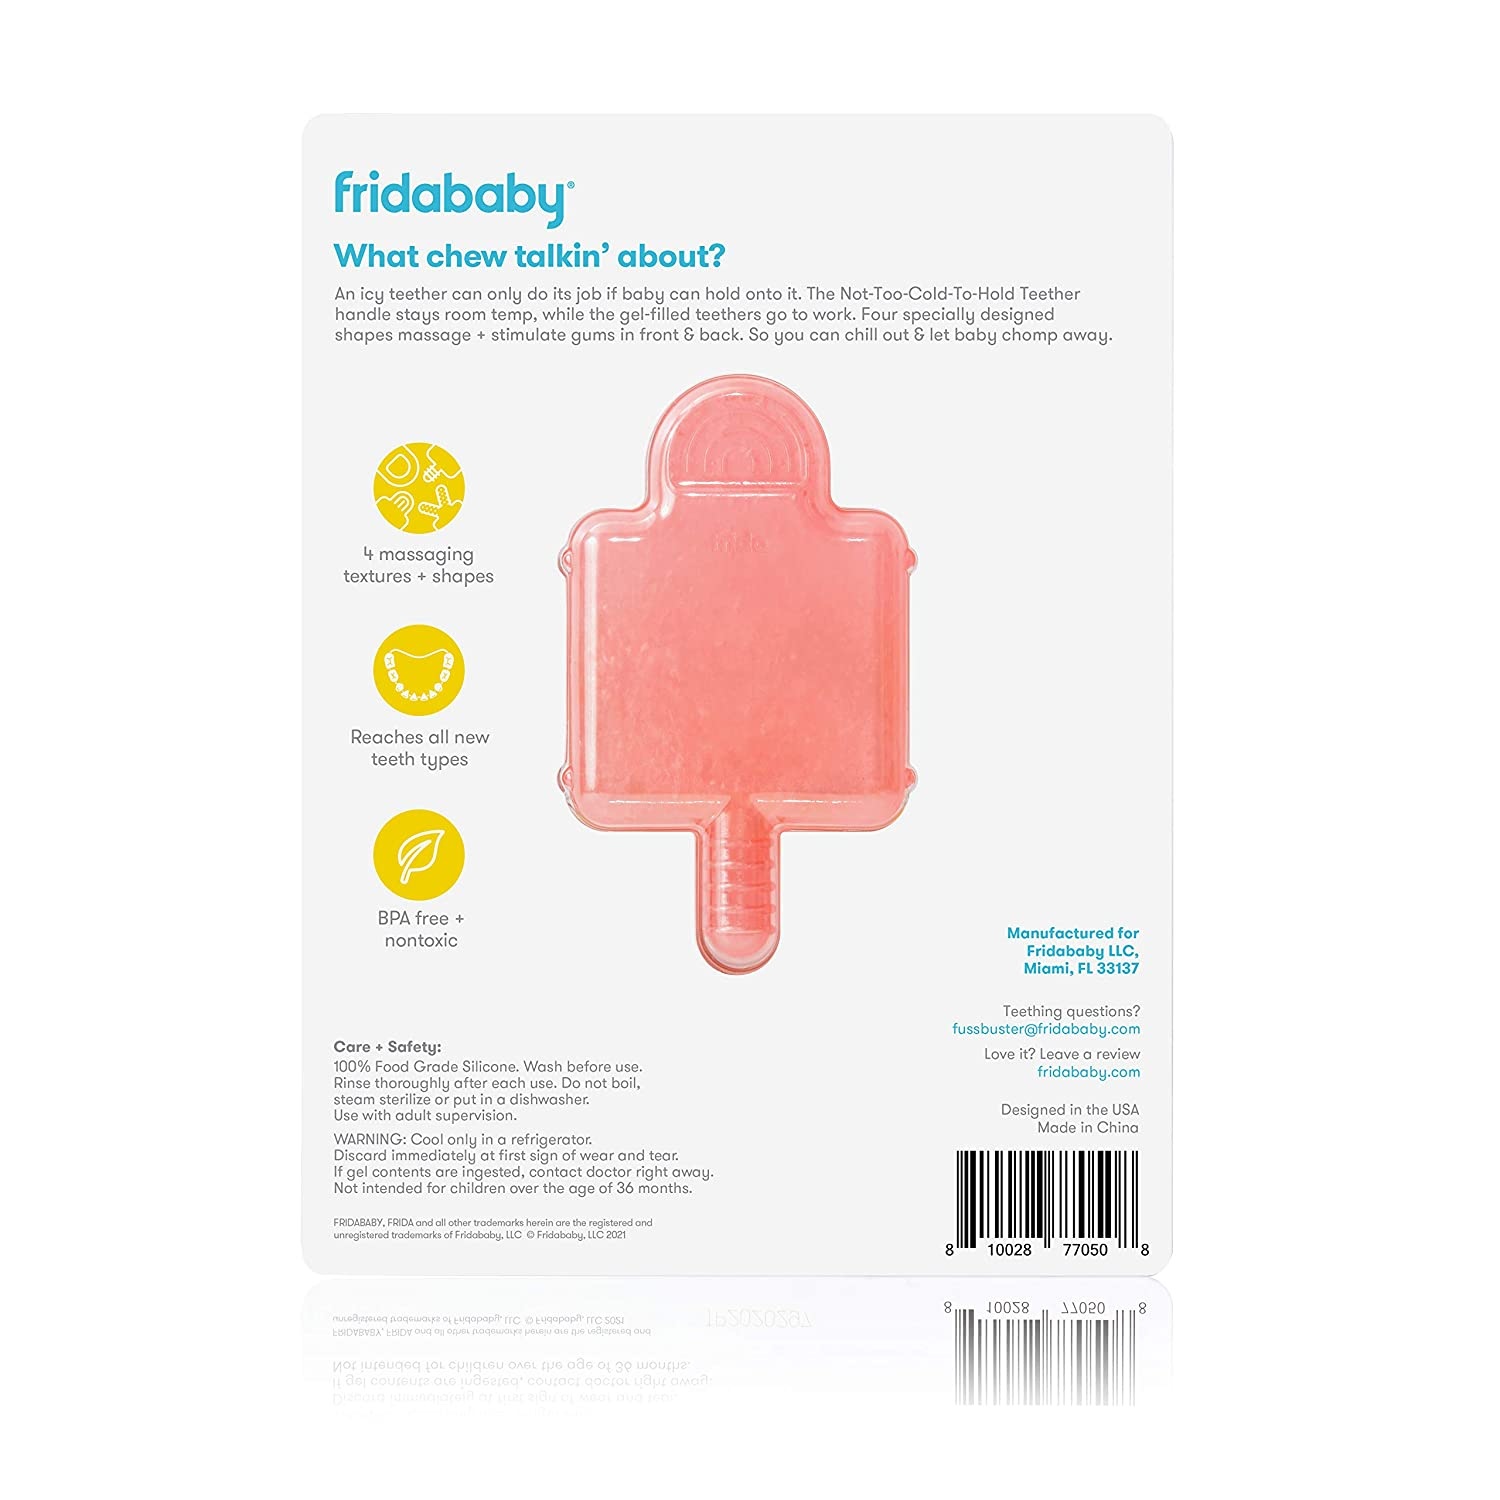 FridaBaby Not-Too-Cold-to-Hold BPA-Free Silicone Teether by Frida Baby